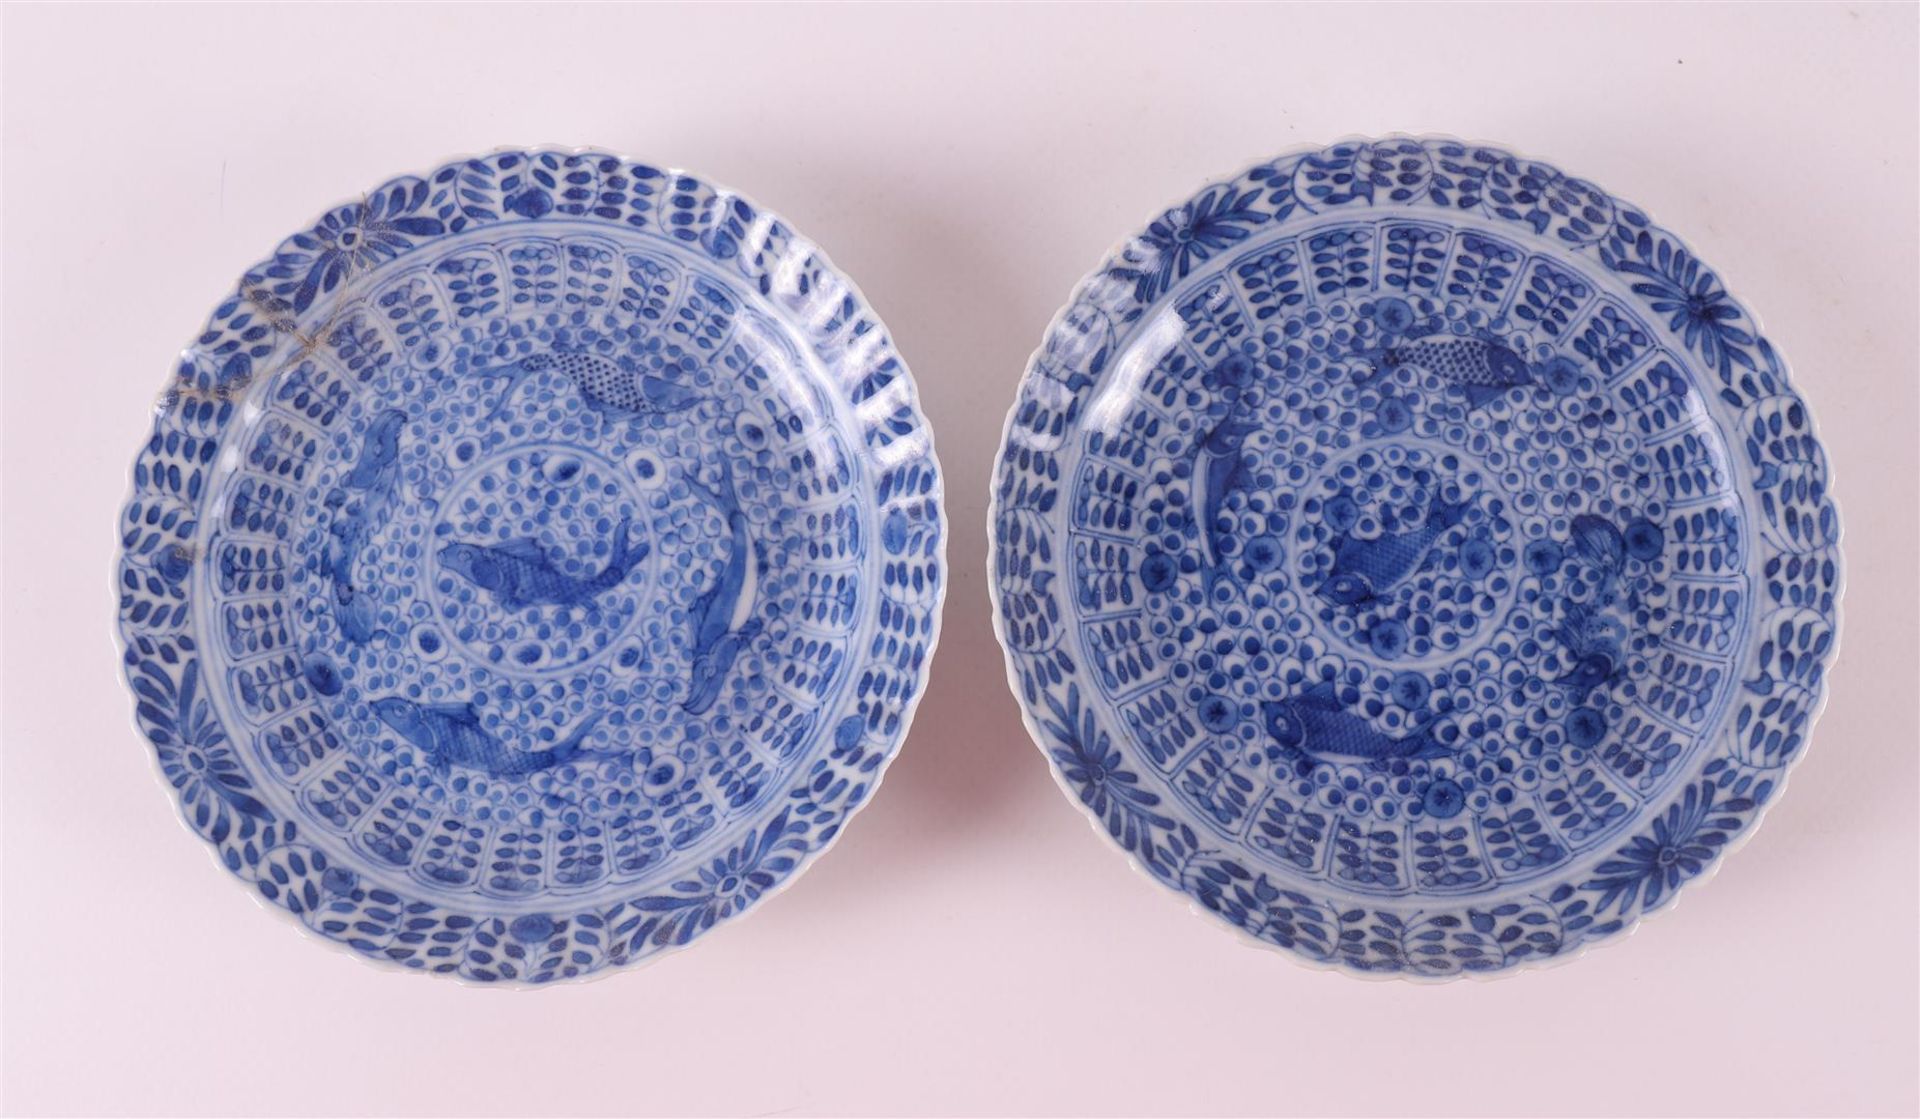 A lot of various blue/white porcelain, China, 18th/19th century. - Image 2 of 22